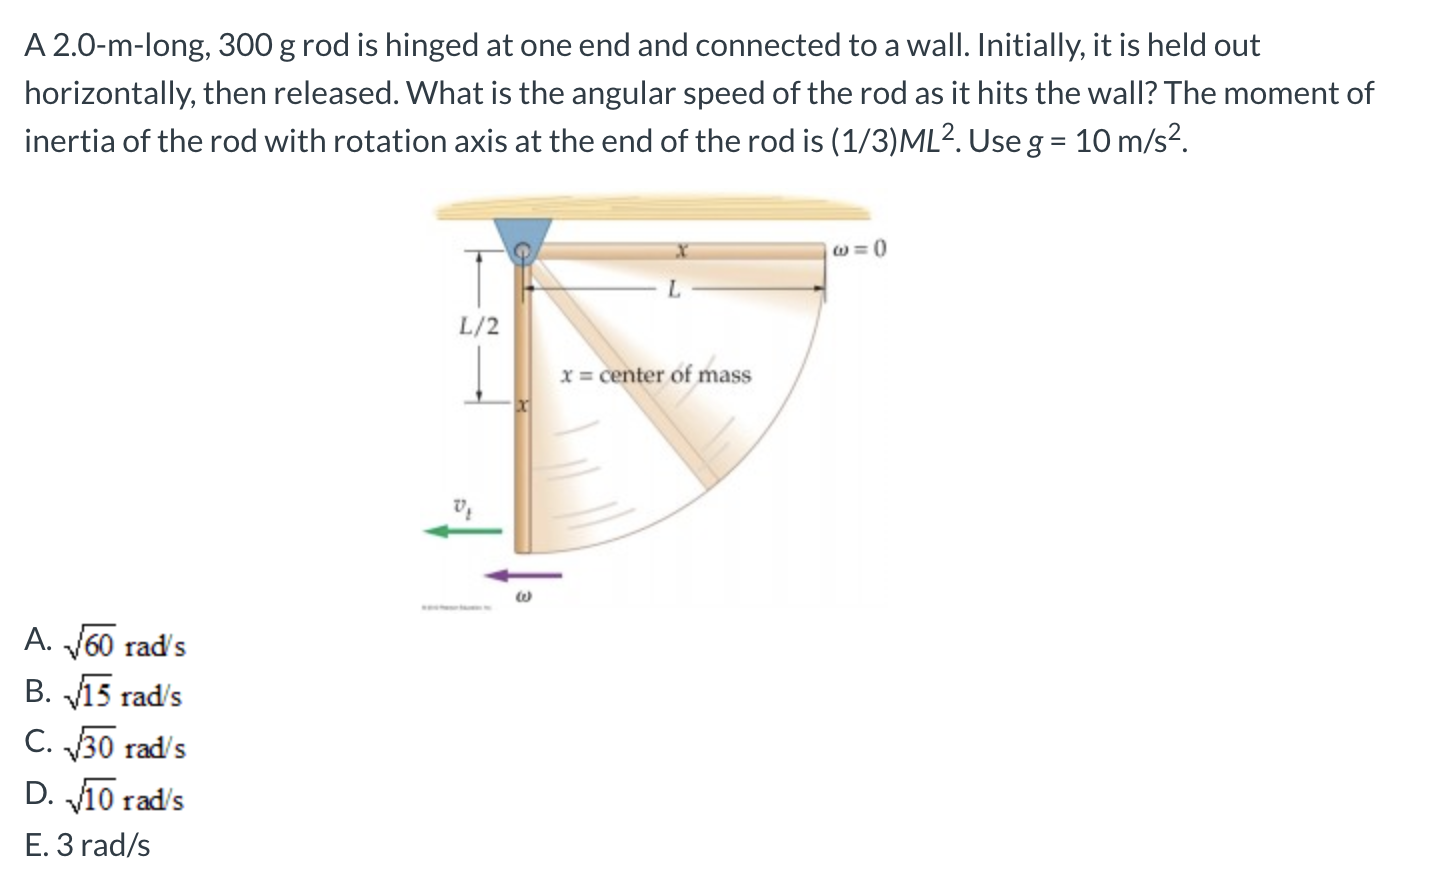 A 2.0-m-long, 300 g rod is hinged at one end and connected to a wall. Initially, it is held out
horizontally, then released. What is the angular speed of the rod as it hits the wall? The moment of
inertia of the rod with rotation axis at the end of the rod is (1/3)ML?. Use g = 10 m/s2.
L/2
x = center of mass
A. J60 rad's
B. 15 rad's
C. 30 rad's
D. 10 rad's
E. 3 rad/s
